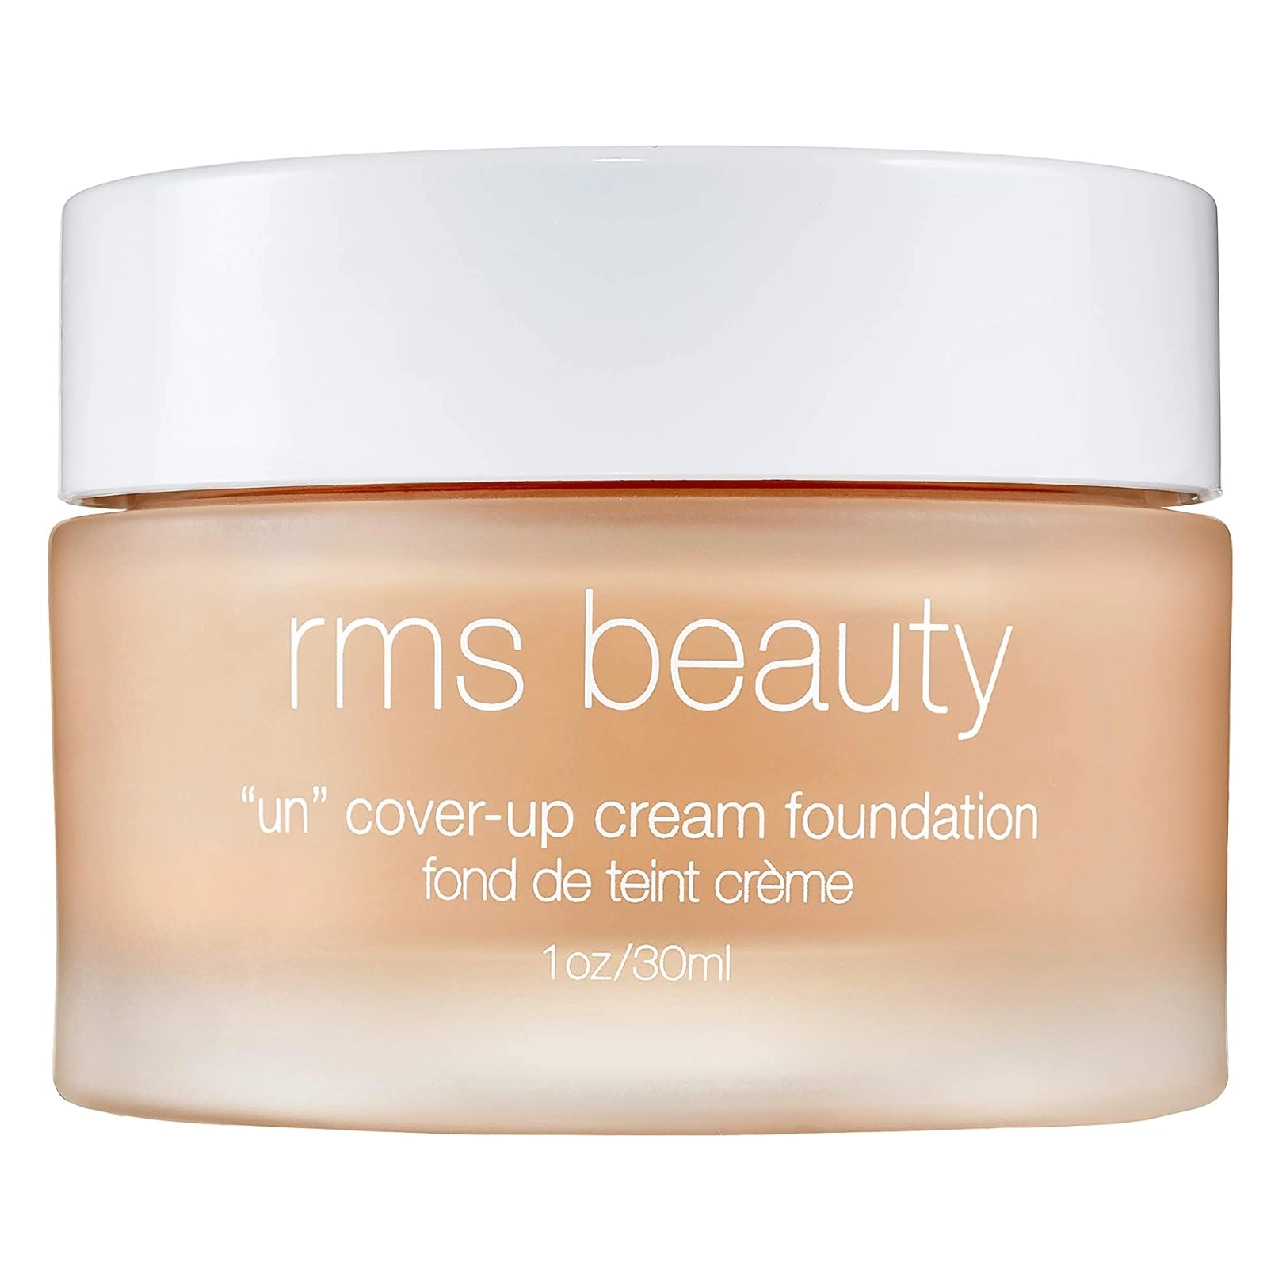 Compact of RMS Beauty "Un" Cover-Up Cream Foundation on a white background.